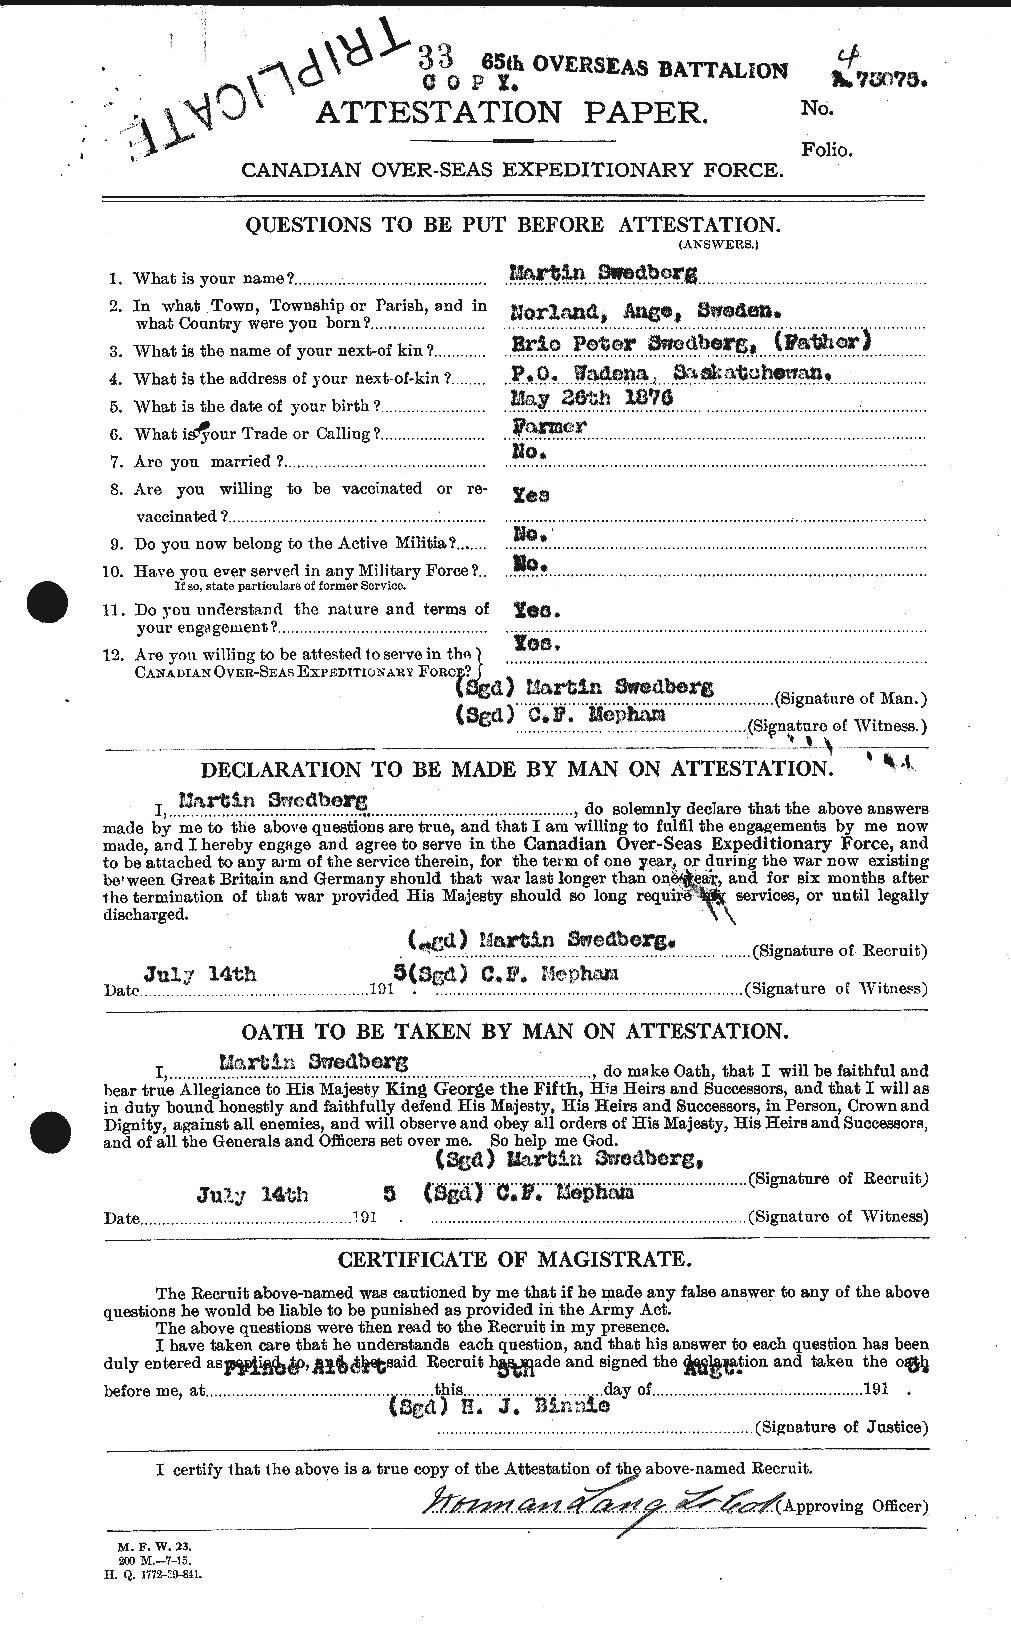 Personnel Records of the First World War - CEF 126113a